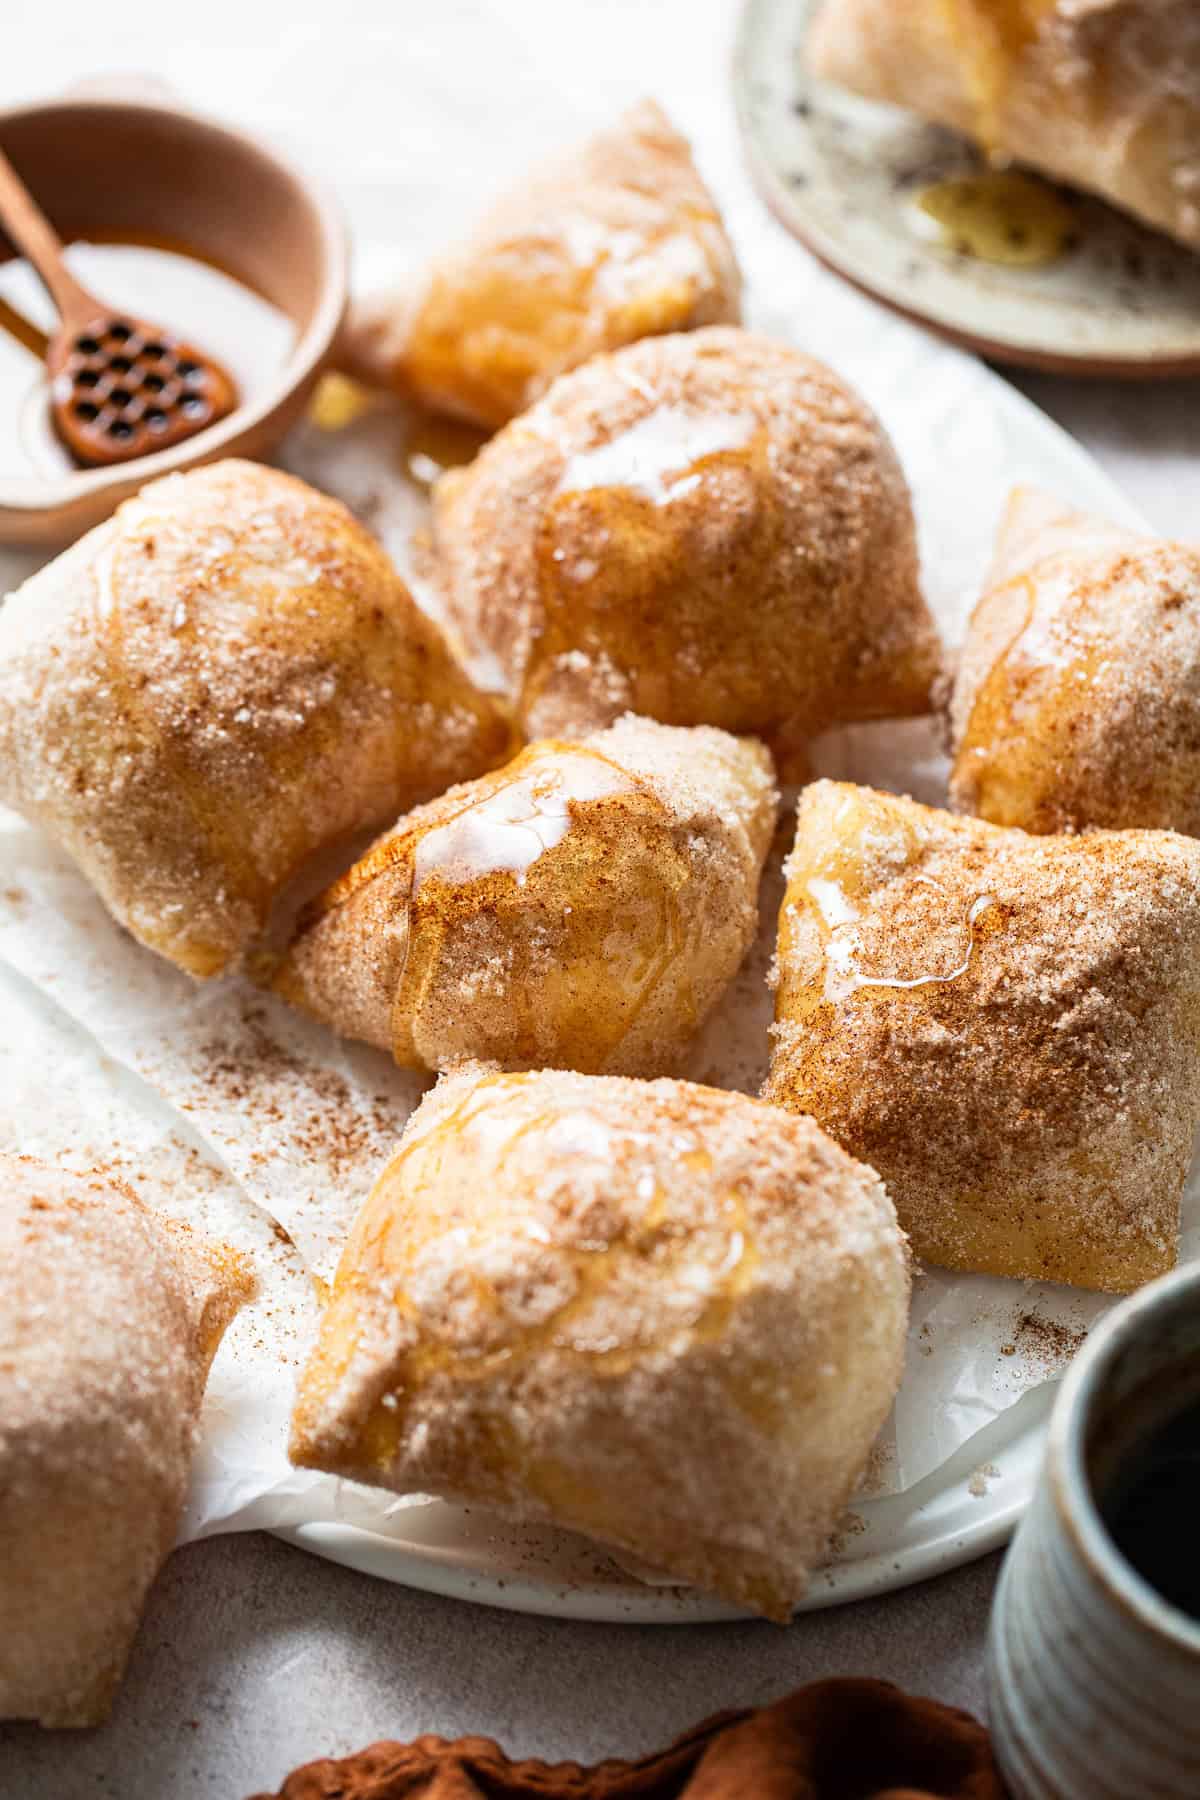 Sopapillas fully cooked, covered with cinnamon sugar, and drizzled with honey.